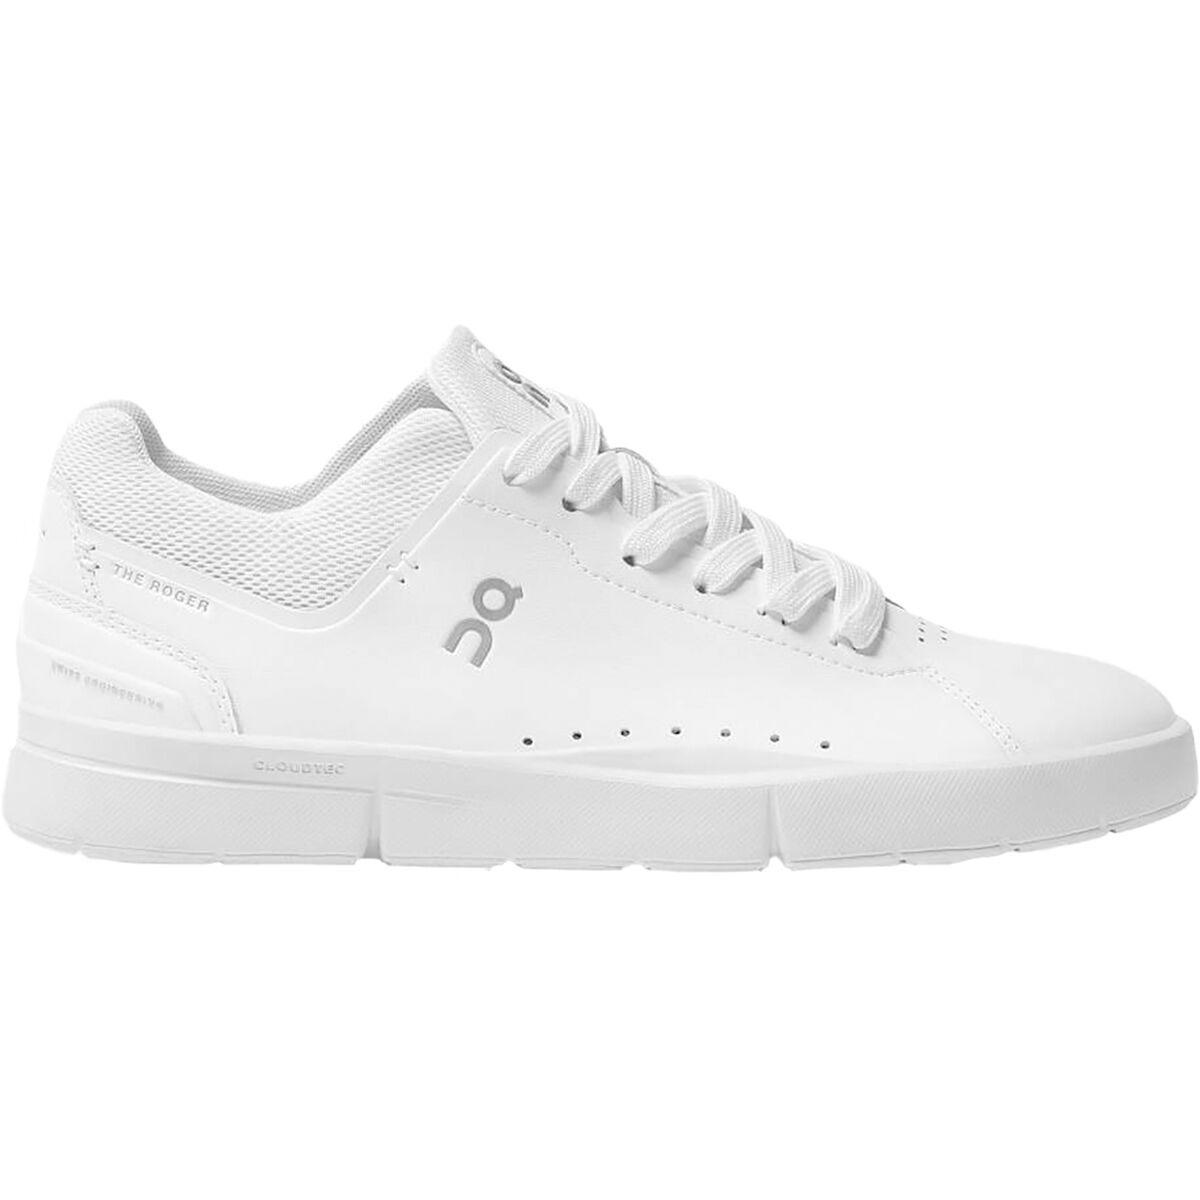 ON Women's The ROGER Advantage Footwear ON All White 6 